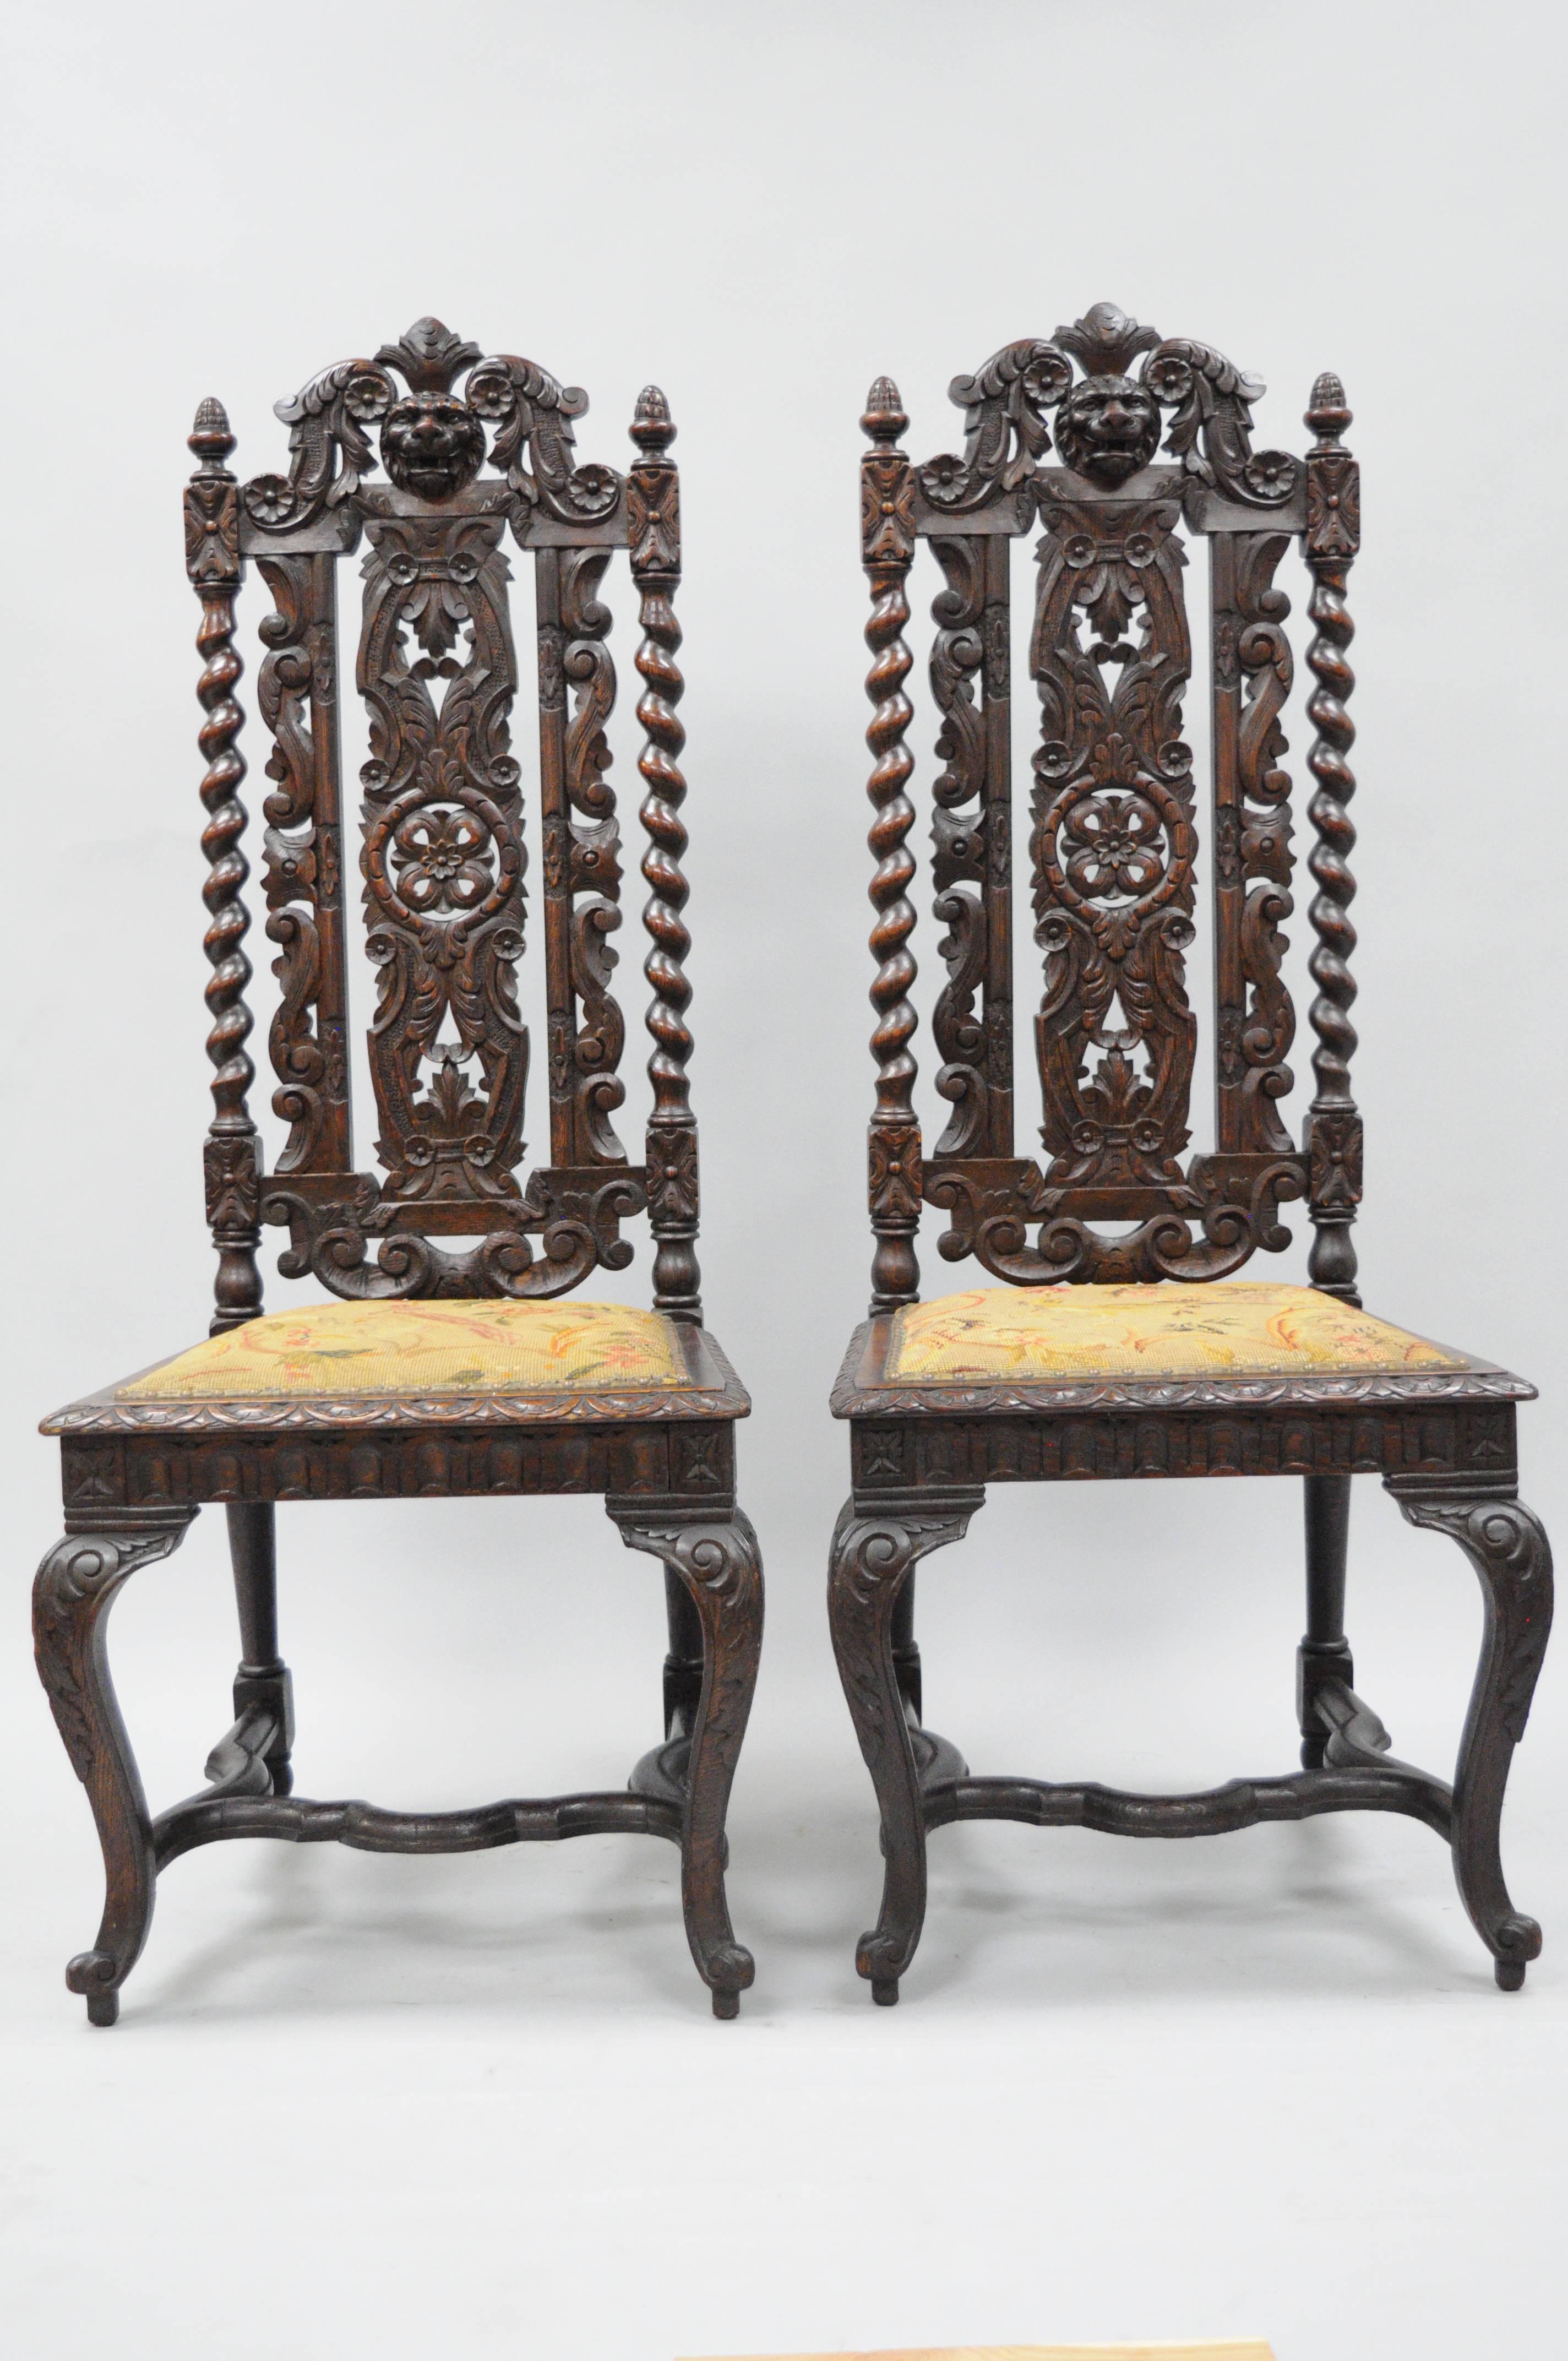 Upholstery Pair of Renaissance Revival Figural Lion, Barley Twist Tall Throne Chairs